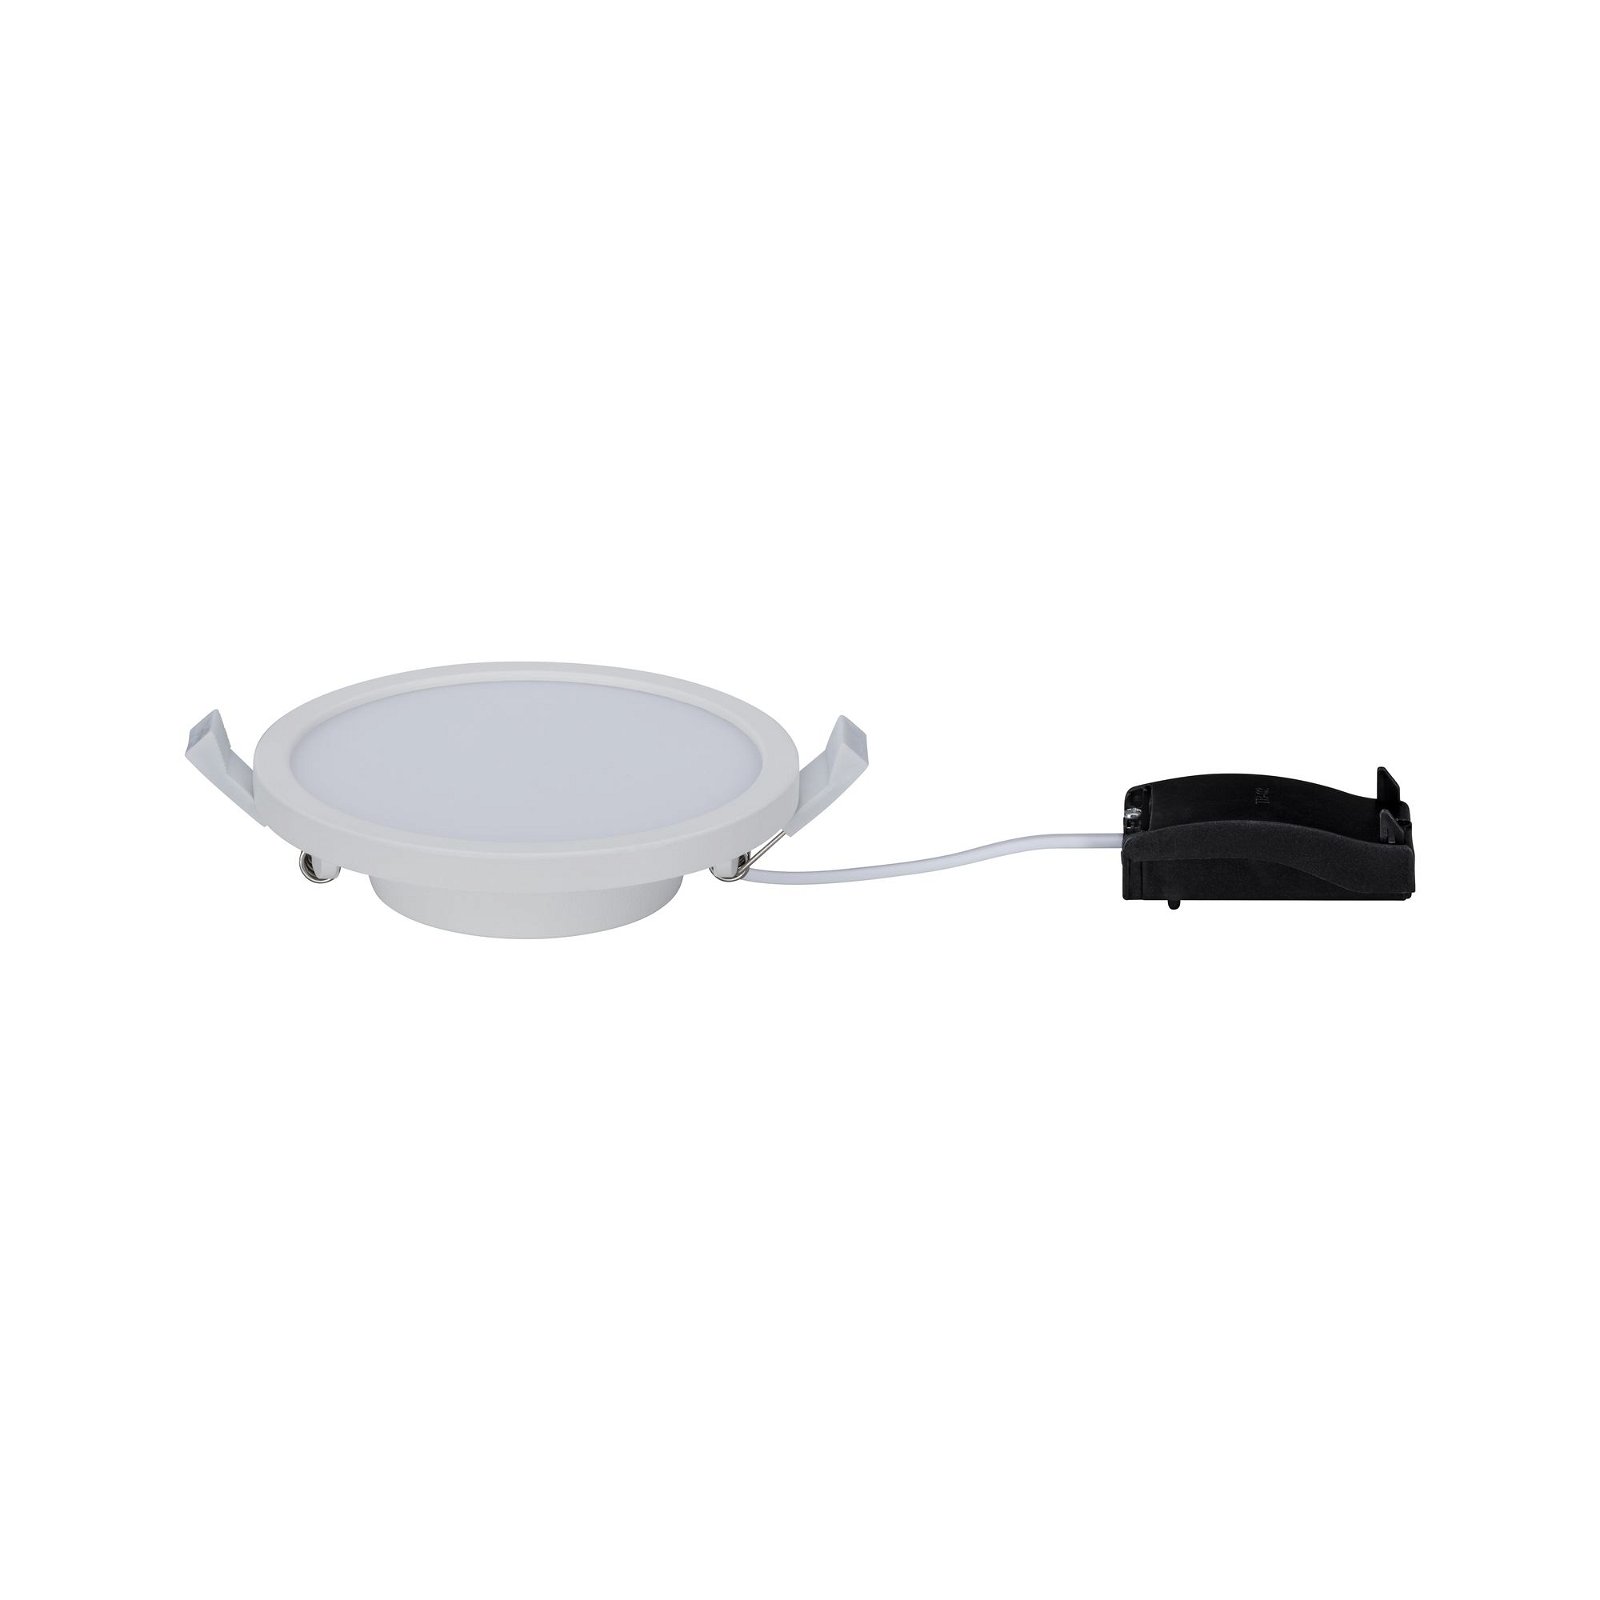 LED-inbouwpaneel Areo rond 120mm 3000K Wit mat